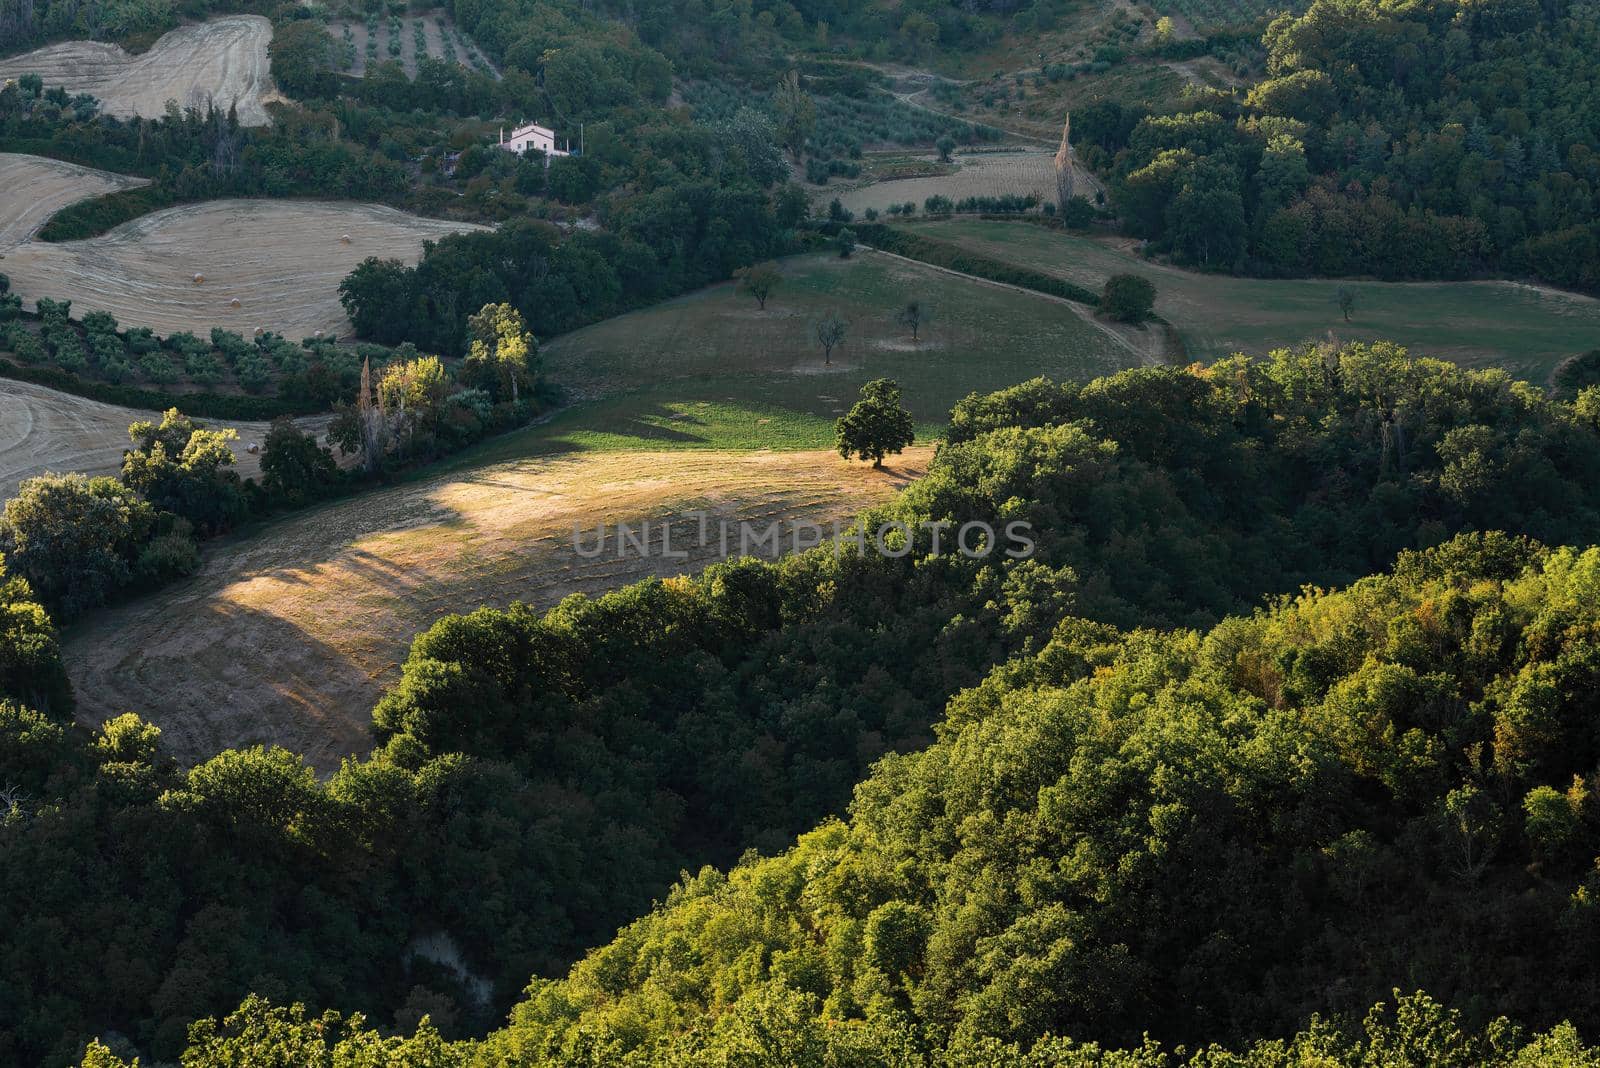 View of the fields and trees near Belvedere Fogliense in the Marche region of Italy by MaxalTamor